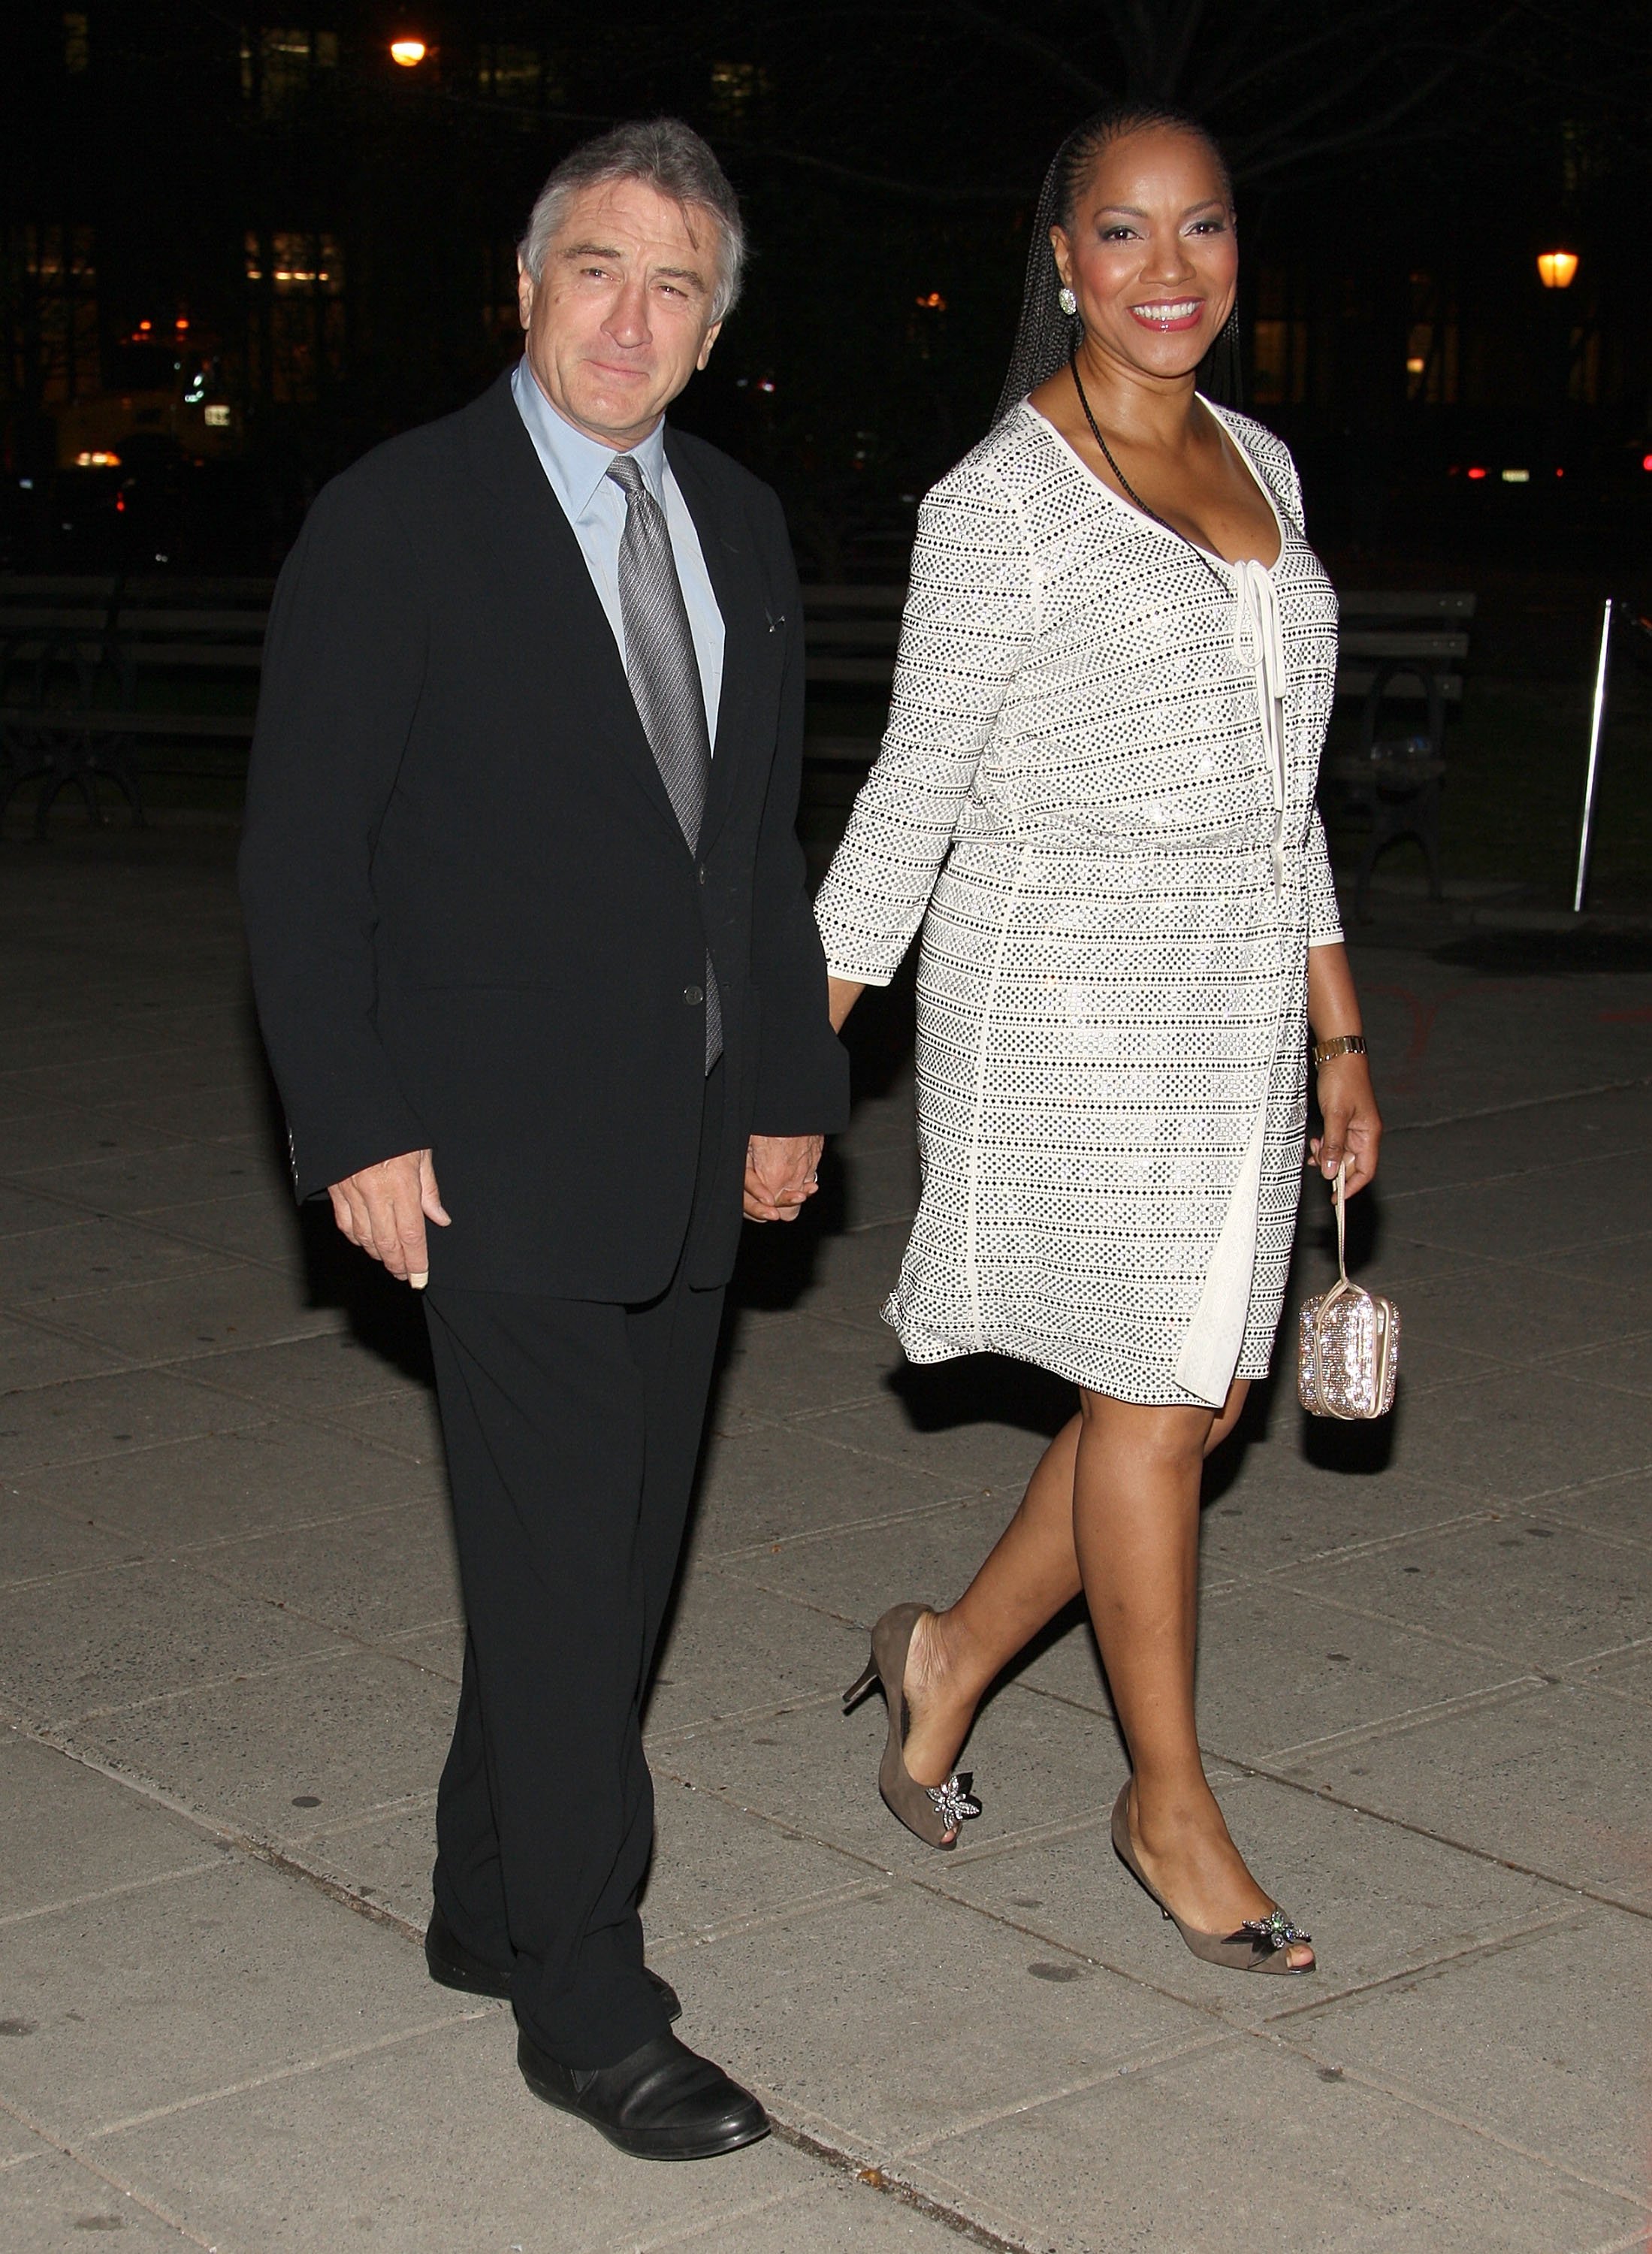 Robert De Niro and wife Grace Hightower attend the Vanity Fair party for the 2009 Tribeca Film Festival at the State Supreme Courthouse on April 21, 2009 in New York City | Source: Getty Images 